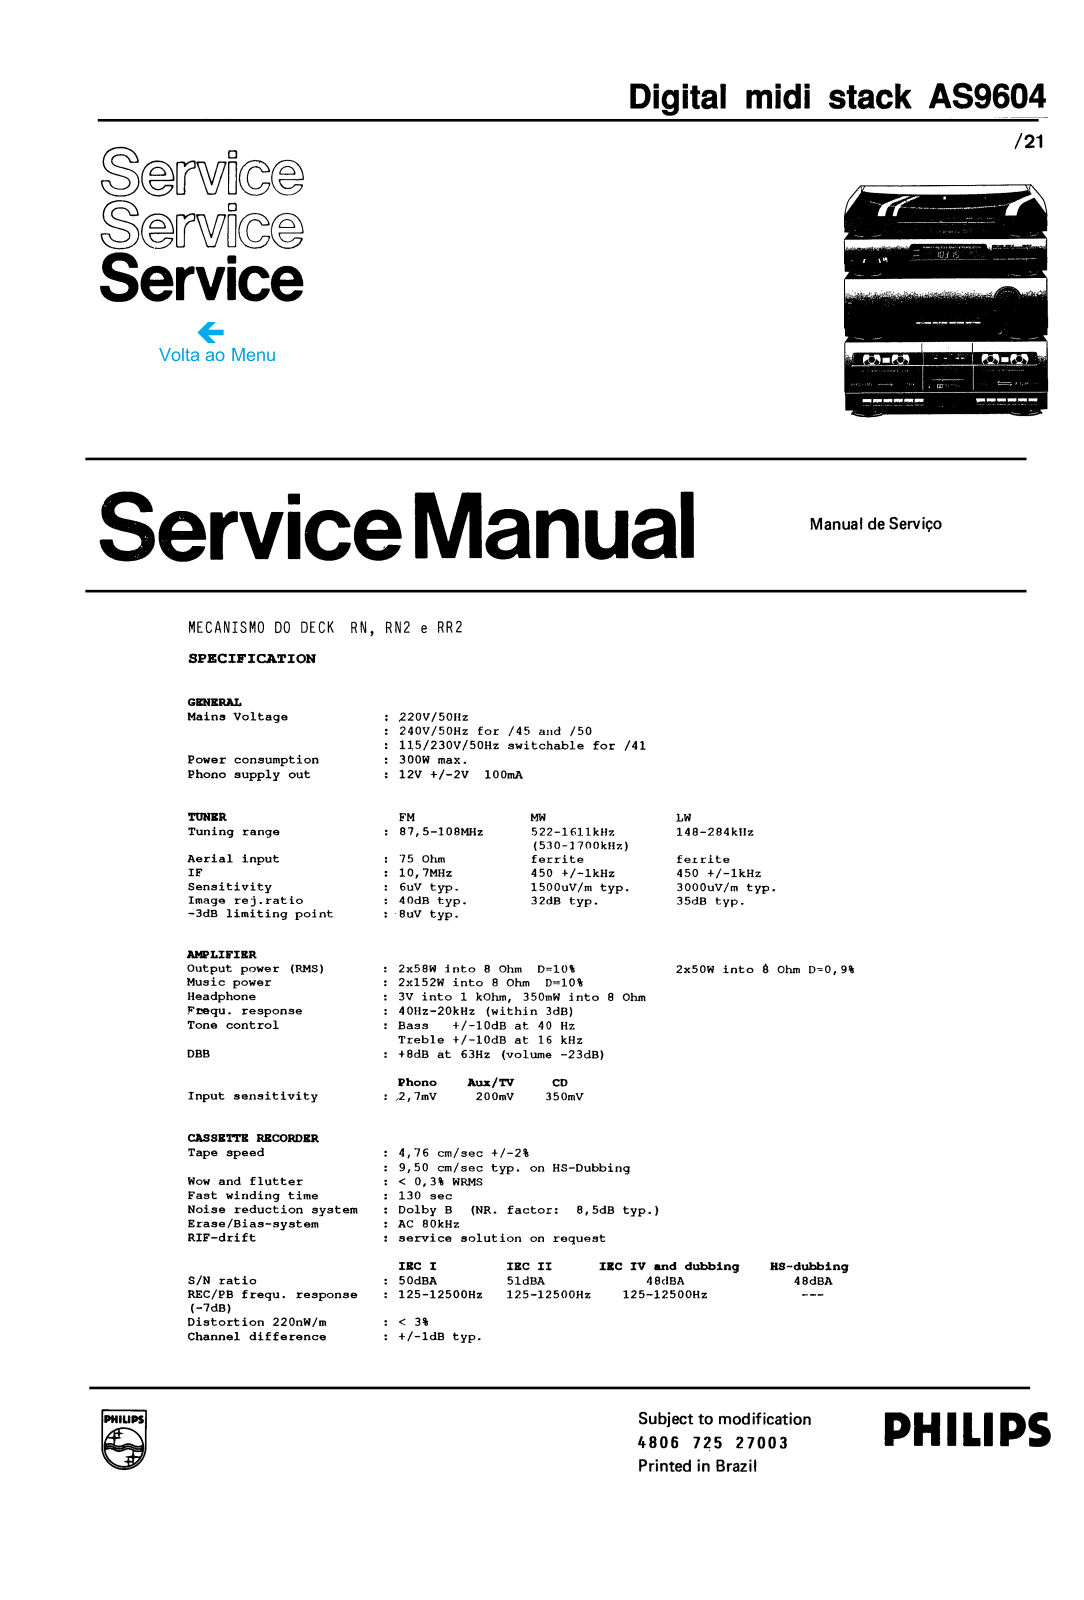 Philips AS-9604 Service manual